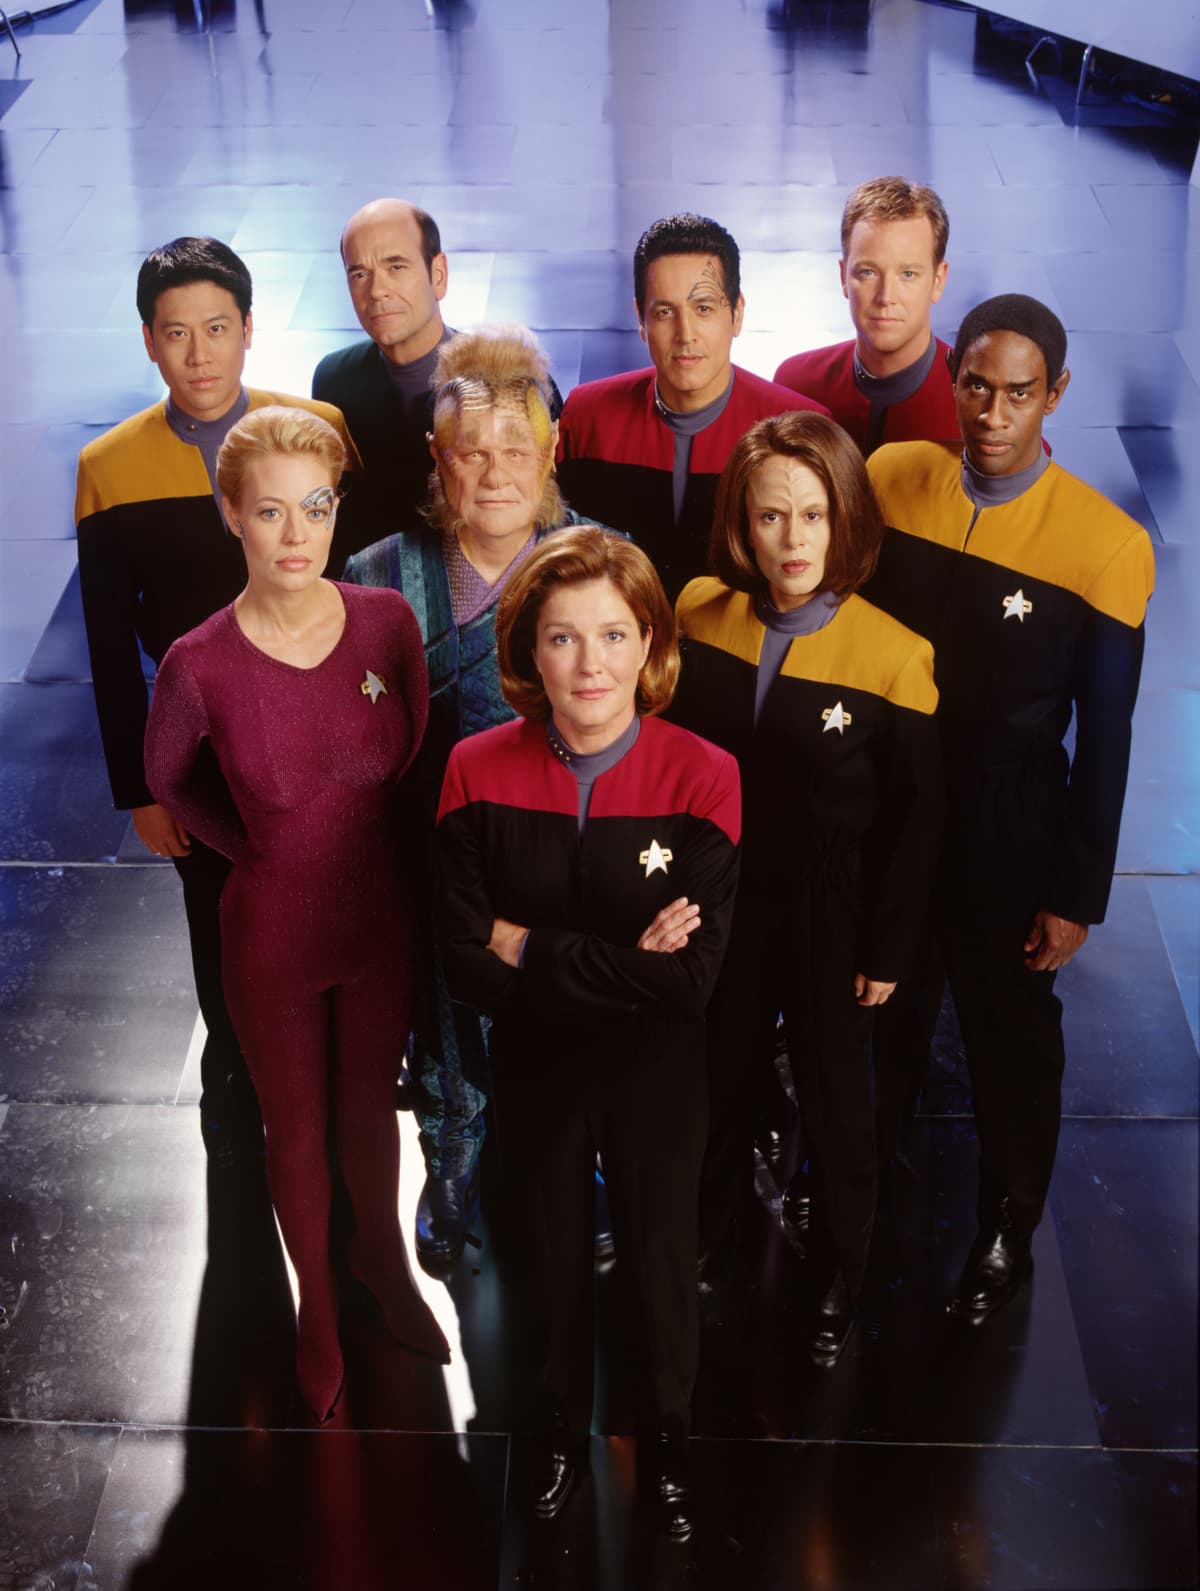 386838 01: Cast Members Of The United Paramount Network's Sci-Fi Television Series "Star Trek: Voyager." Pictured: (Front, Center) Kate Mulgrew, (Second Row, L To R) Jeri Ryan, Ethan Phillips, Roxann Dawson And Tim Russ (Back Row, L To R) Garrett Wang, Robert Picardo, Robert Beltran And Robert Duncan Mcneill.  (Photo By Getty Images)